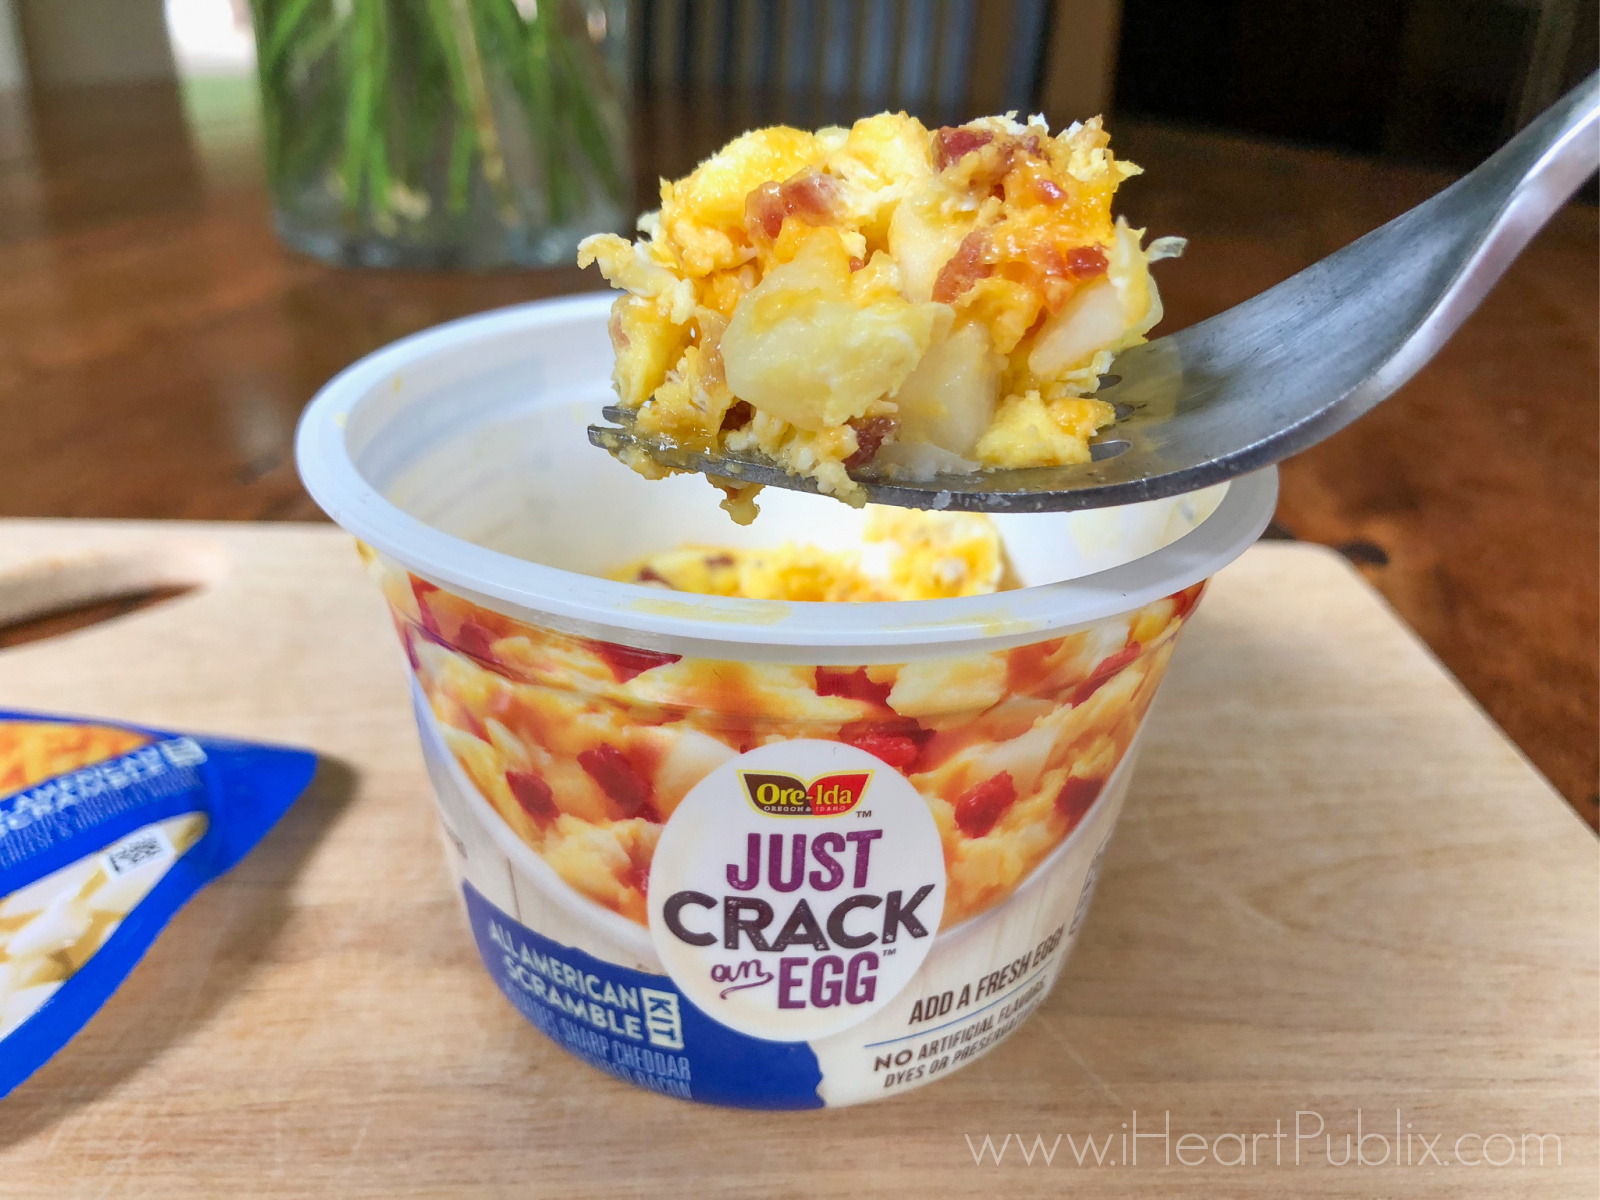 Big Savings On Just Crack An Egg Products At Publix - Buy One, Get One FREE! on I Heart Publix